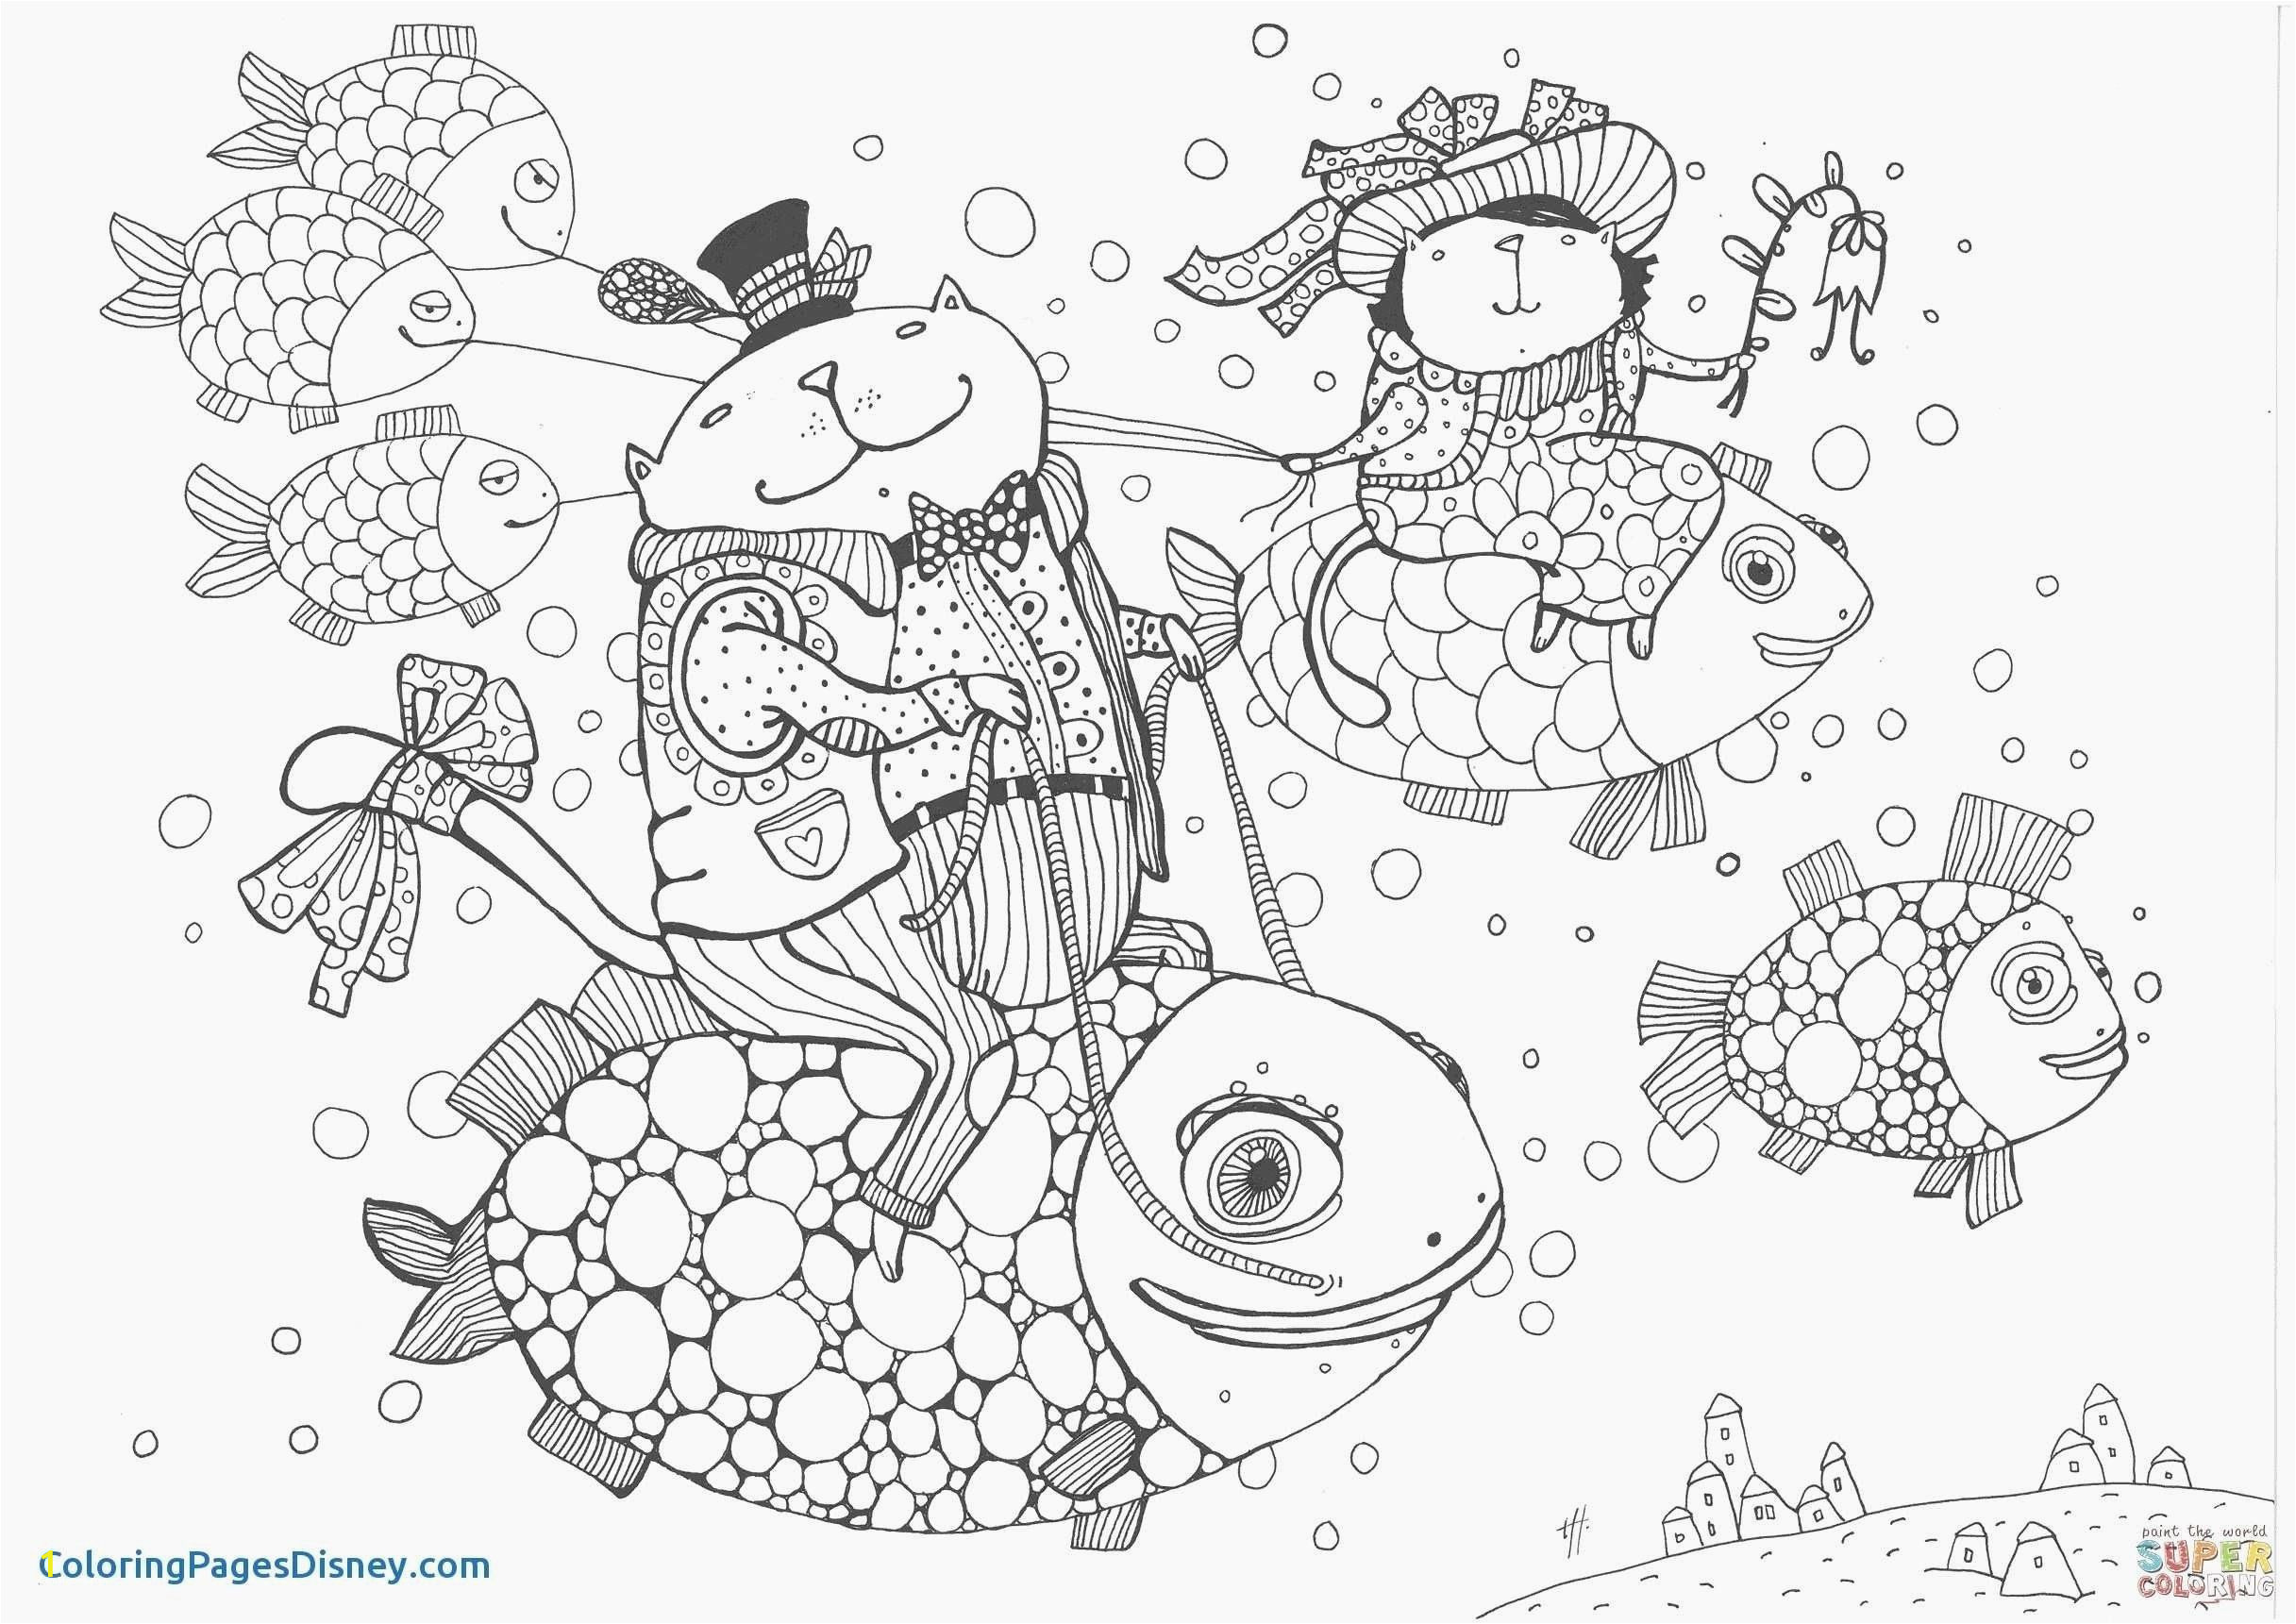 Disney Coloring Pages for Adults Online Coloring Pages Free Disney Coloring Pages for Adults Free